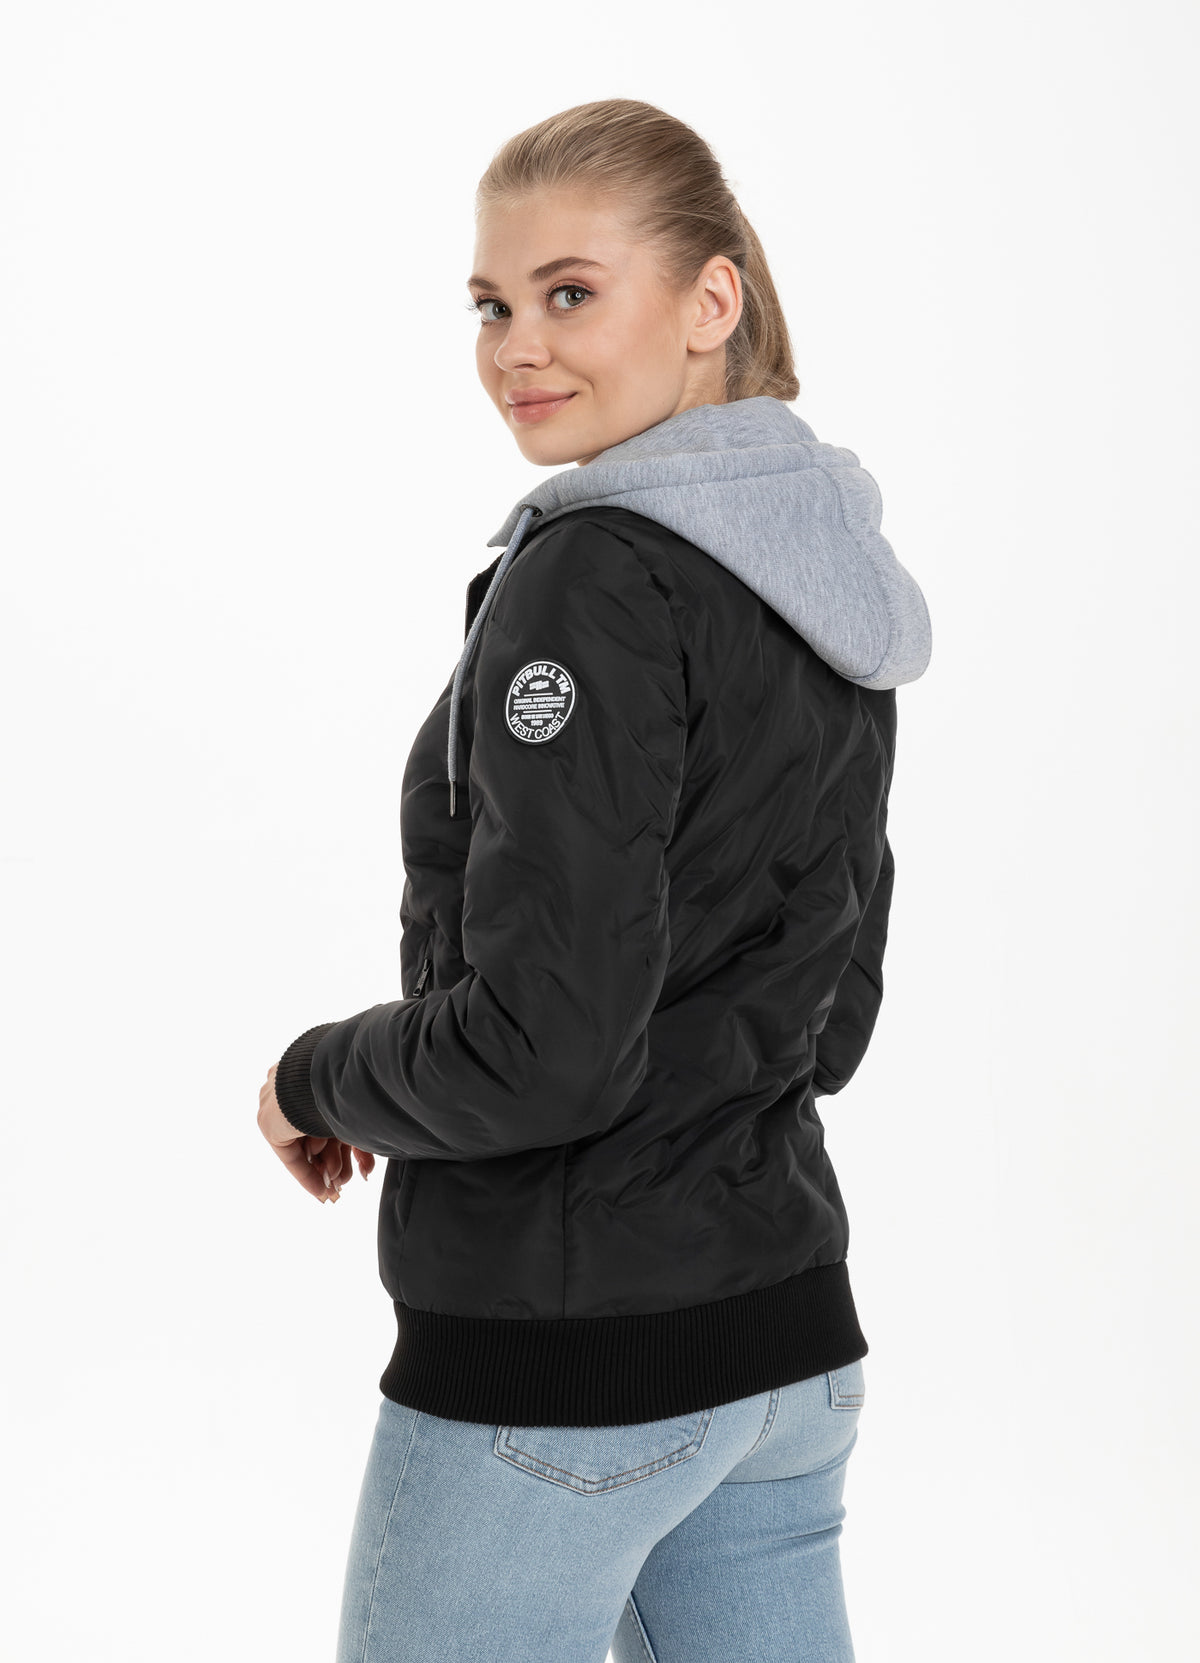 Women's Quilted Jacket Winchester Black - Pitbull West Coast International Store 